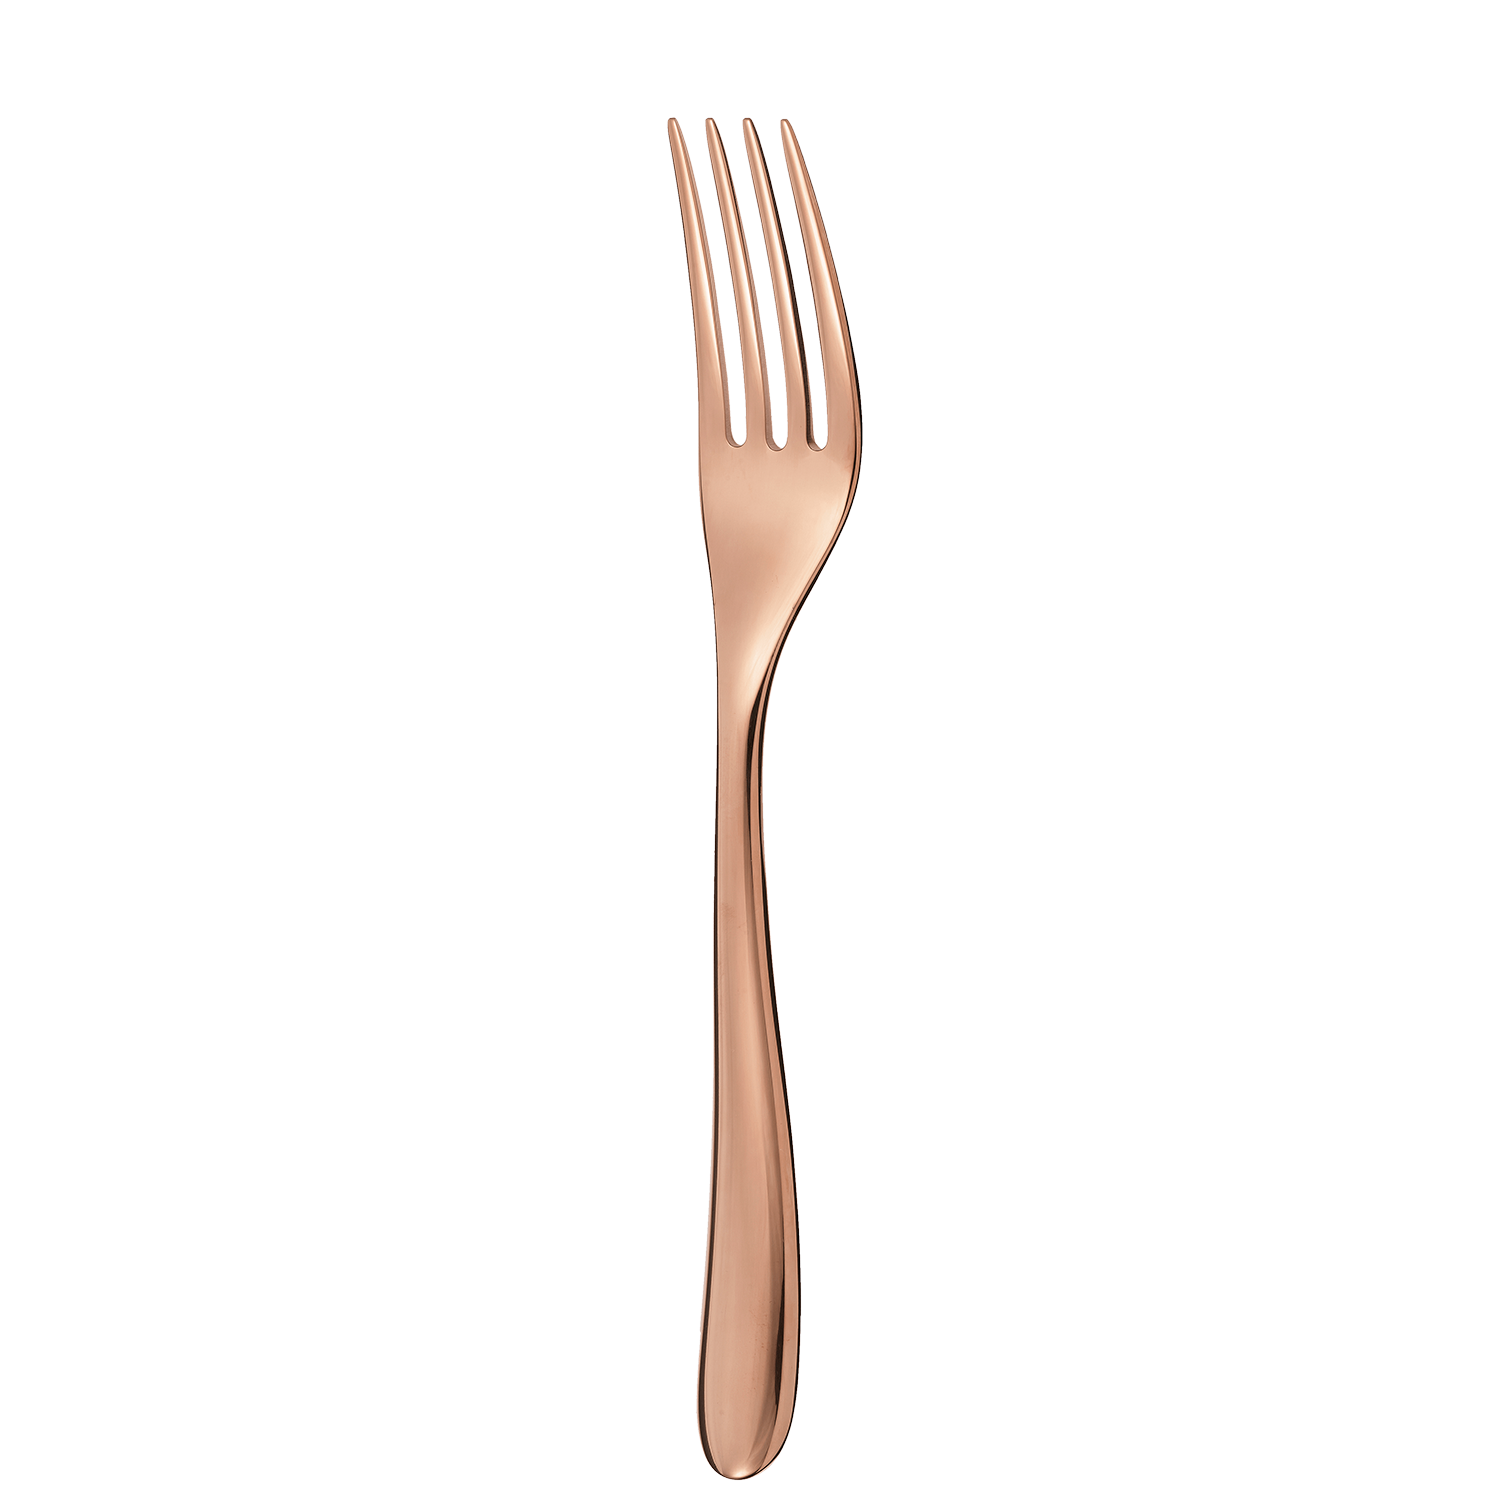 Copper stainless steel table fork